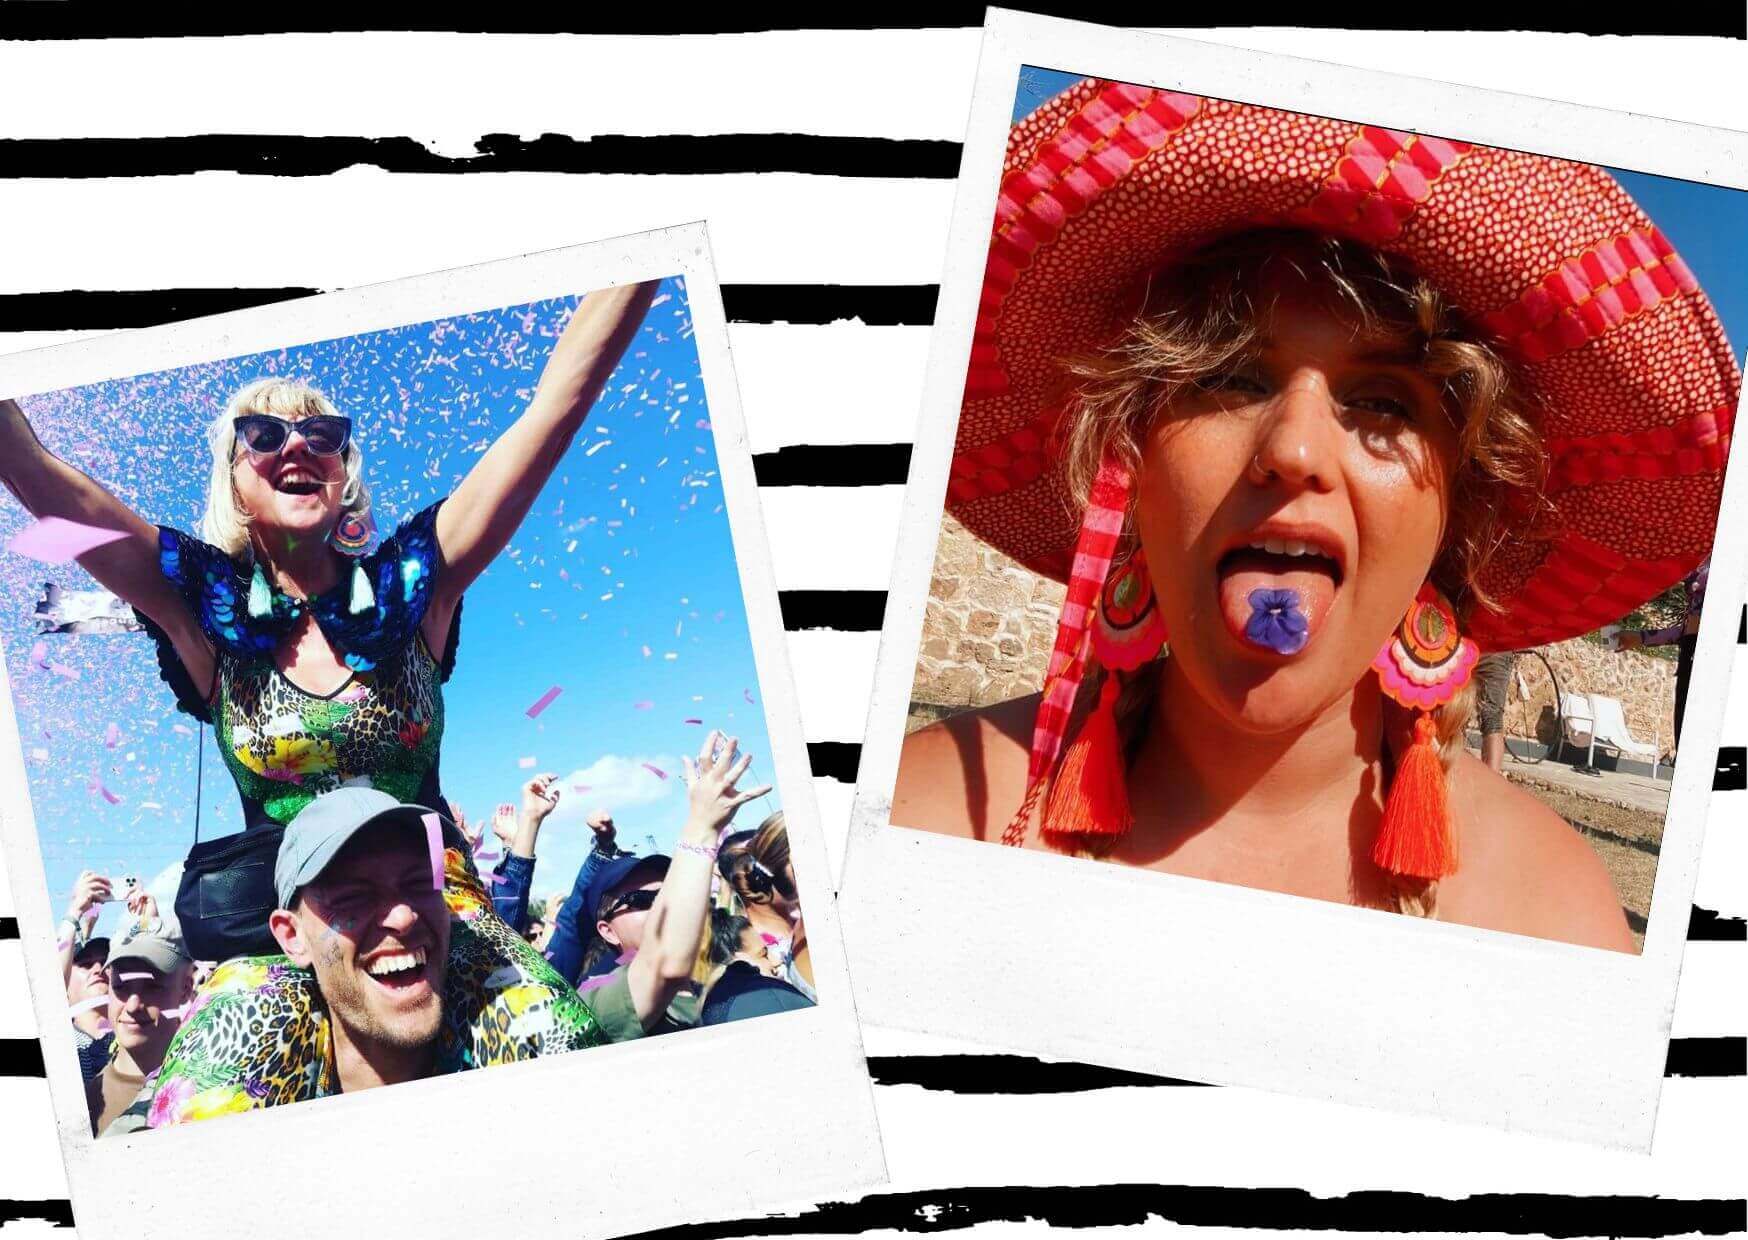 Two polaroid photos sit on a black and white patterned background. The photo on the left features a woman wearing a patterned catsuit, sequinned cape and tassel earrings sitting on a mans shoulders in a crowd of people. Both are smiling and the sky behind them is blue and littered with pink confetti. The photo on the right is a close up of a woman with her tongue out wearing a large red sun hat and statement tassel earrings. The sun is shining and the photo feels warm